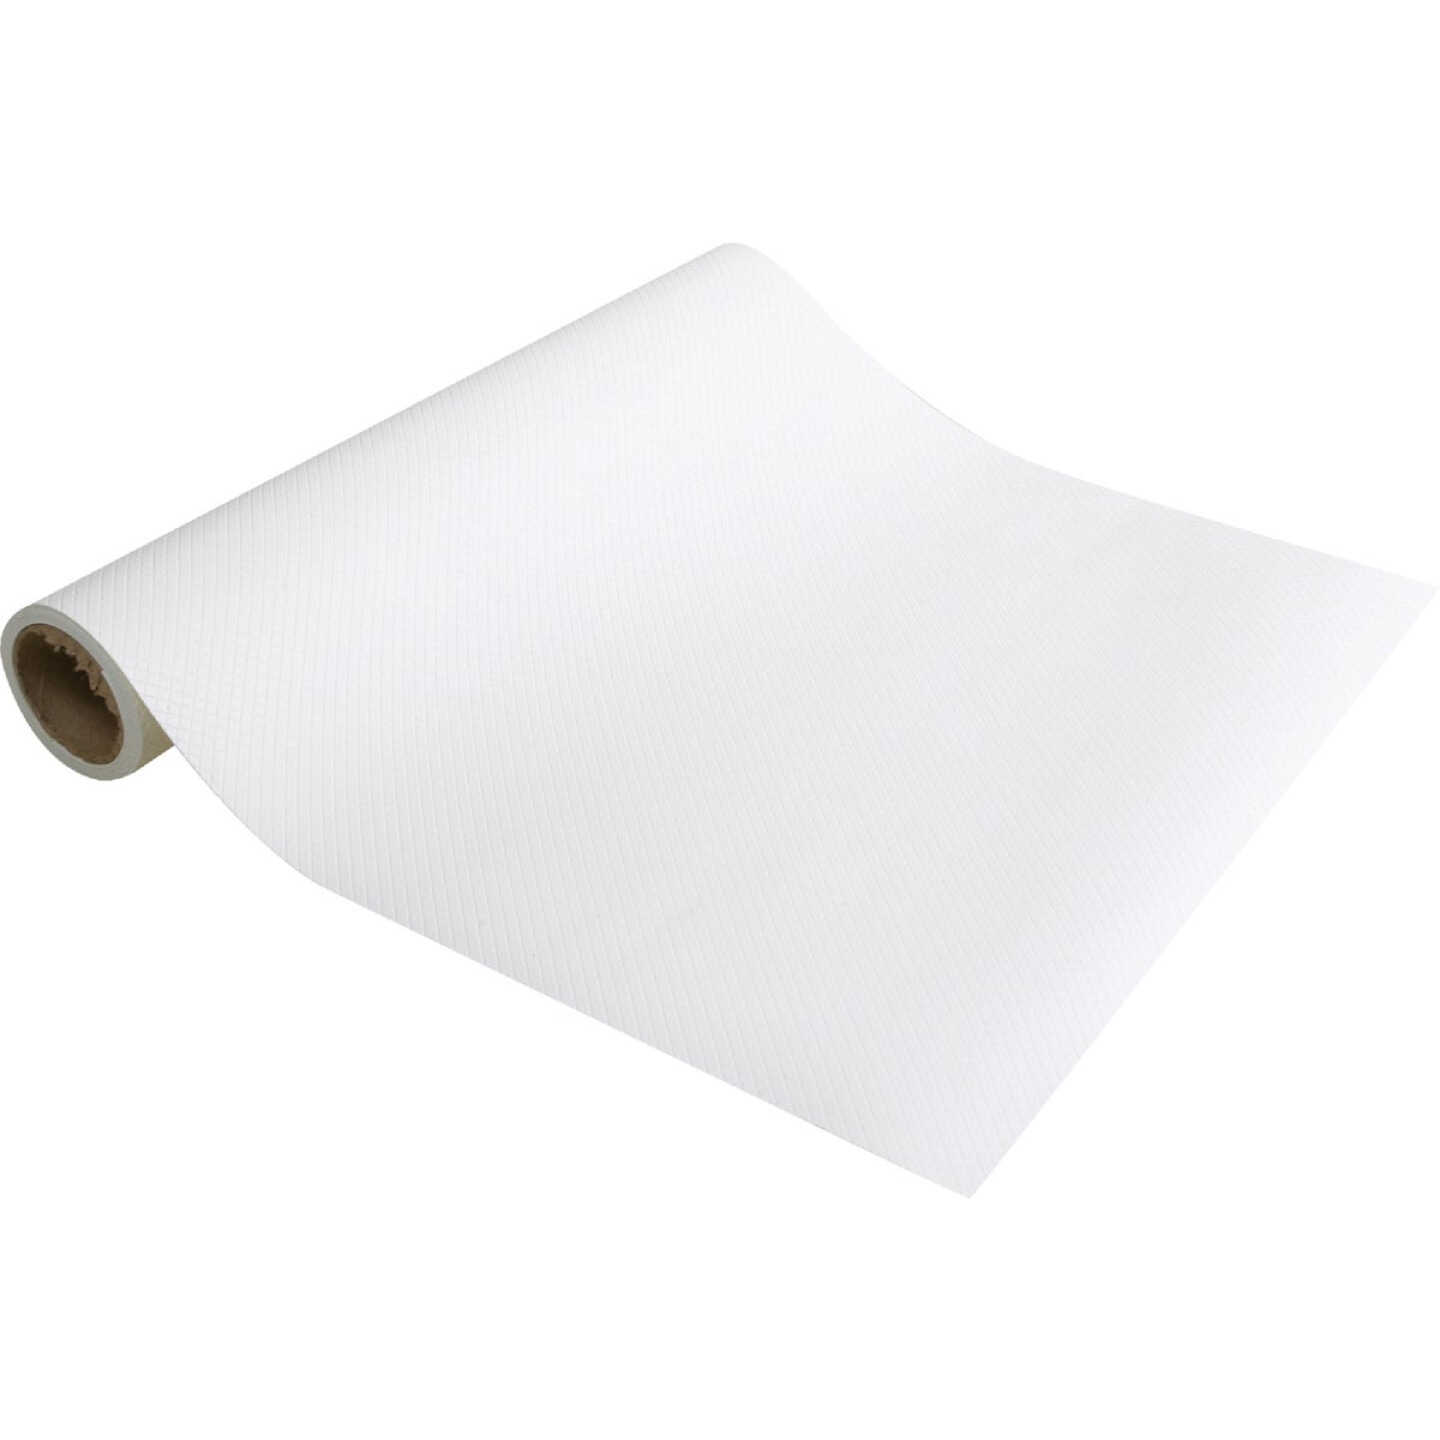 Con-Tact 12 In. x 5 Ft. White Non-Adhesive Shelf Liner - Brownsboro  Hardware & Paint